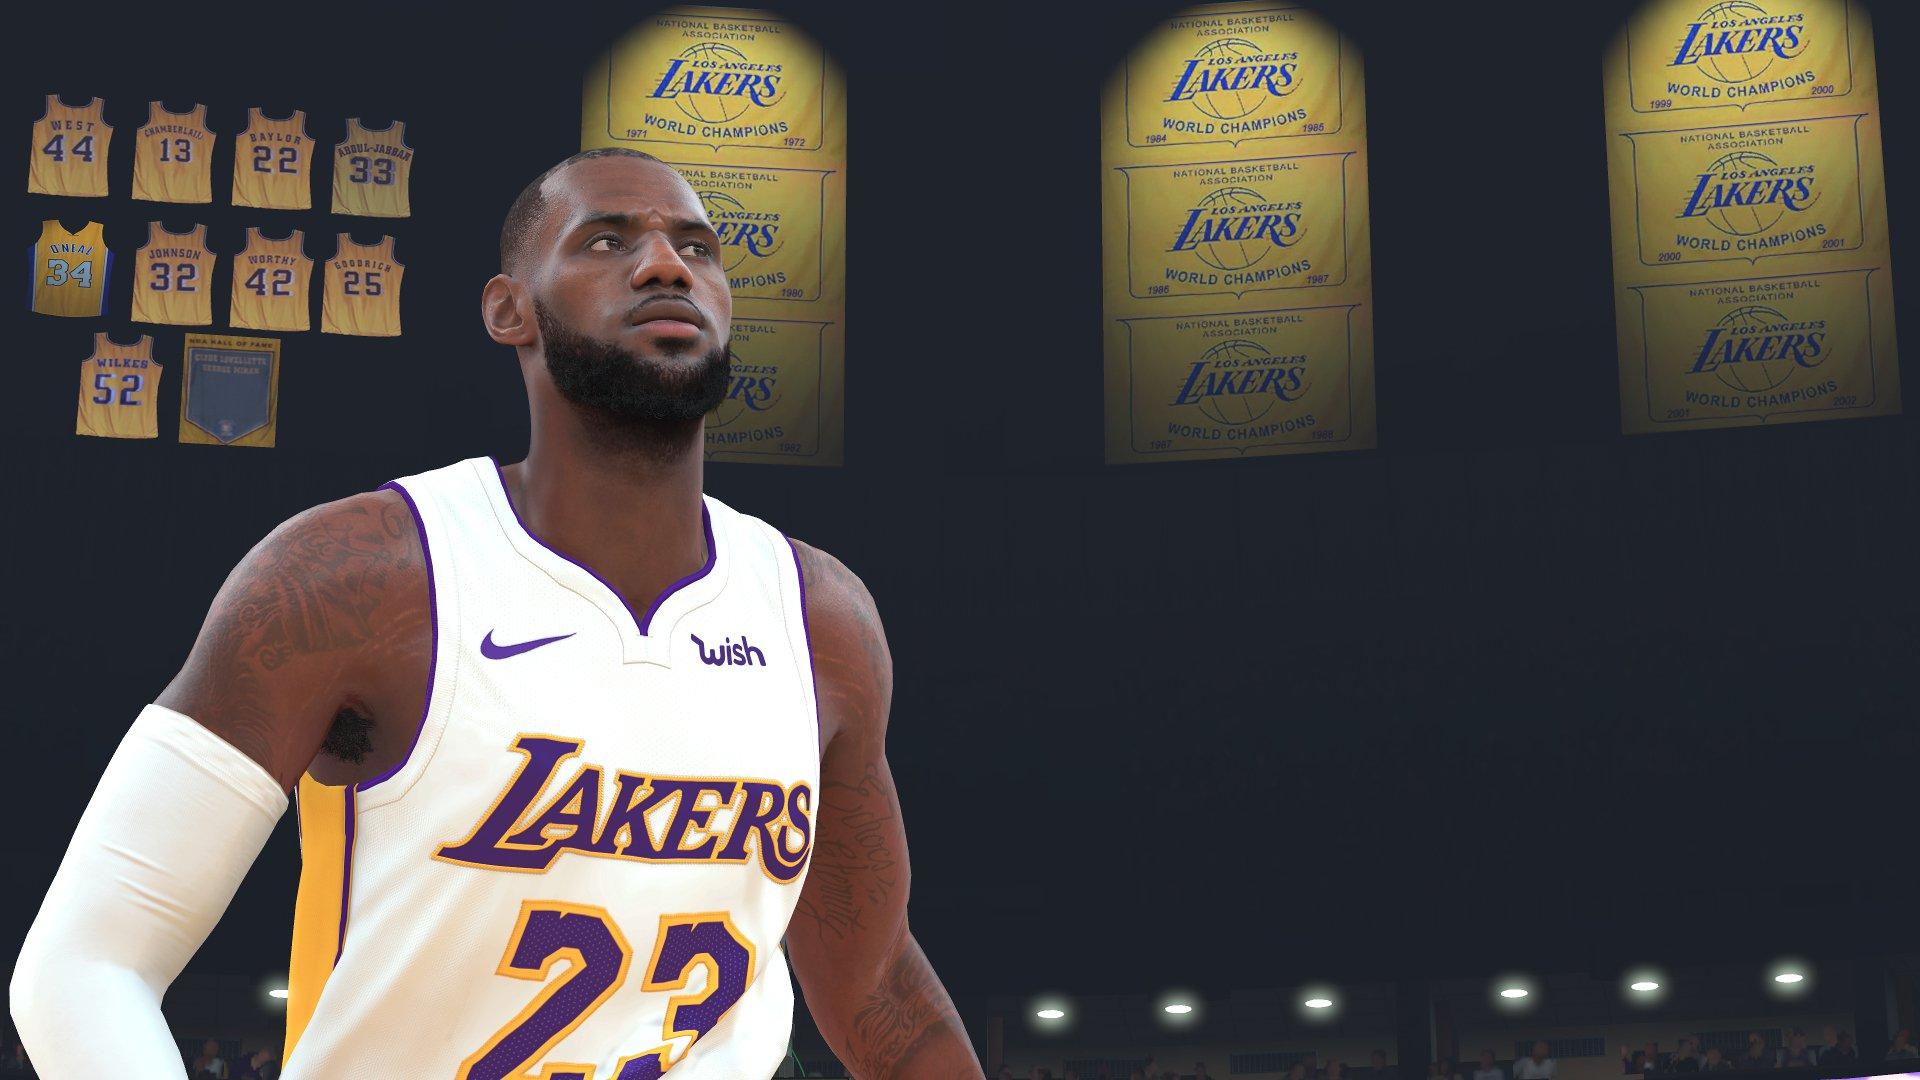 NBA 2K20 Ratings: LeBron James Doesn't Deserve 97 Or The Top Spot